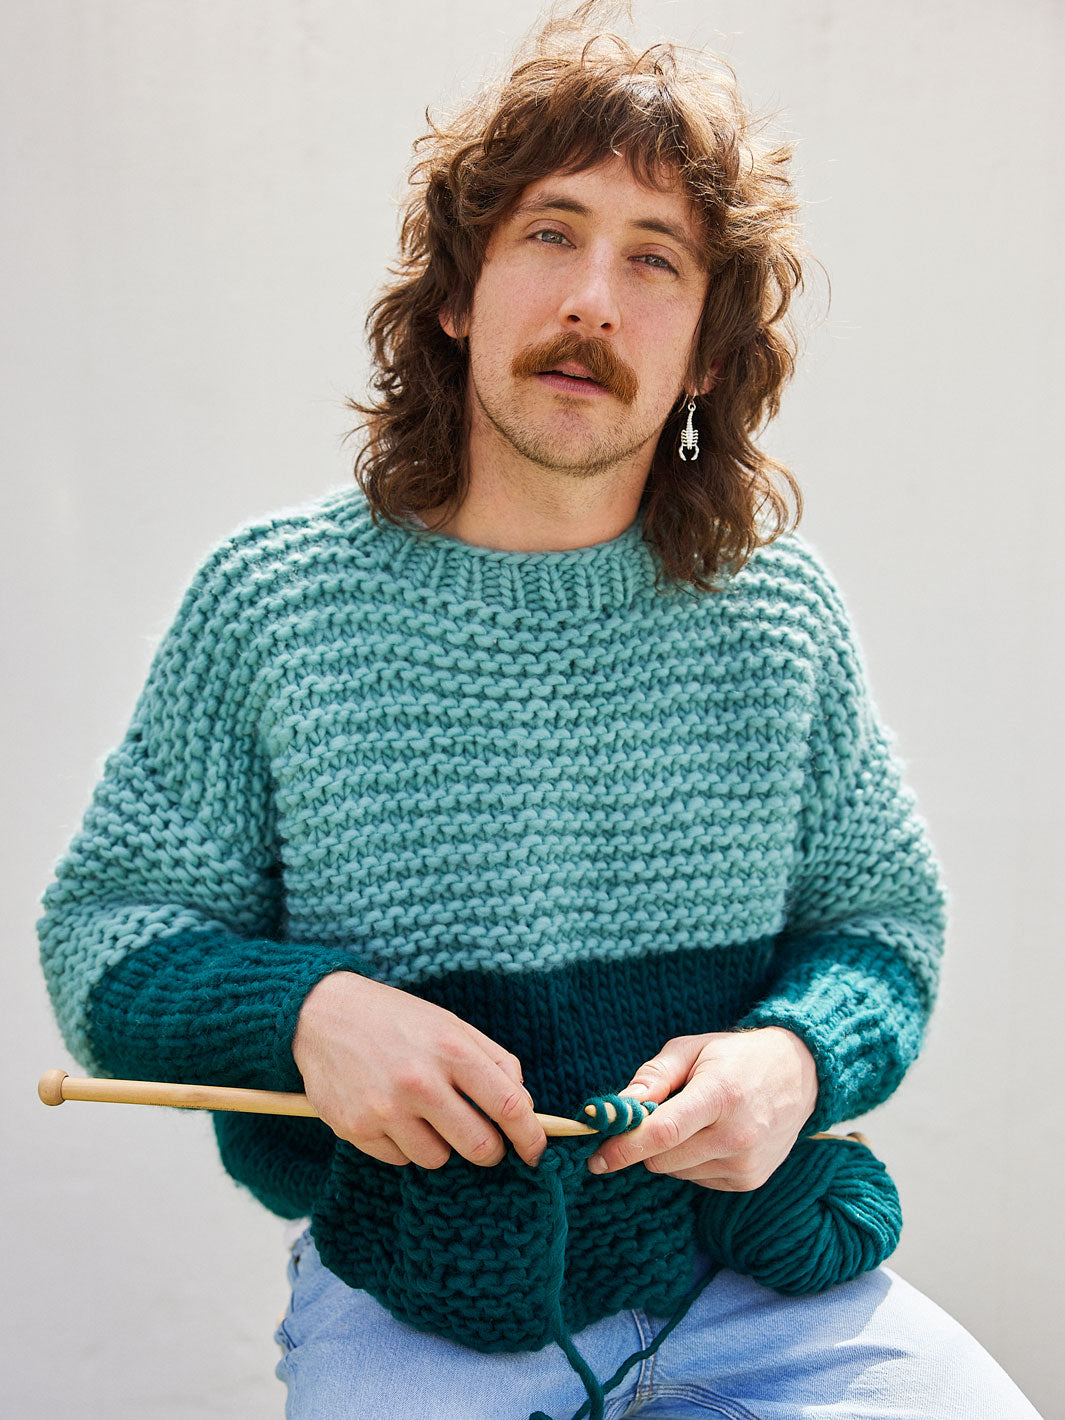 Man knitting wearing a chunky knitted jumper